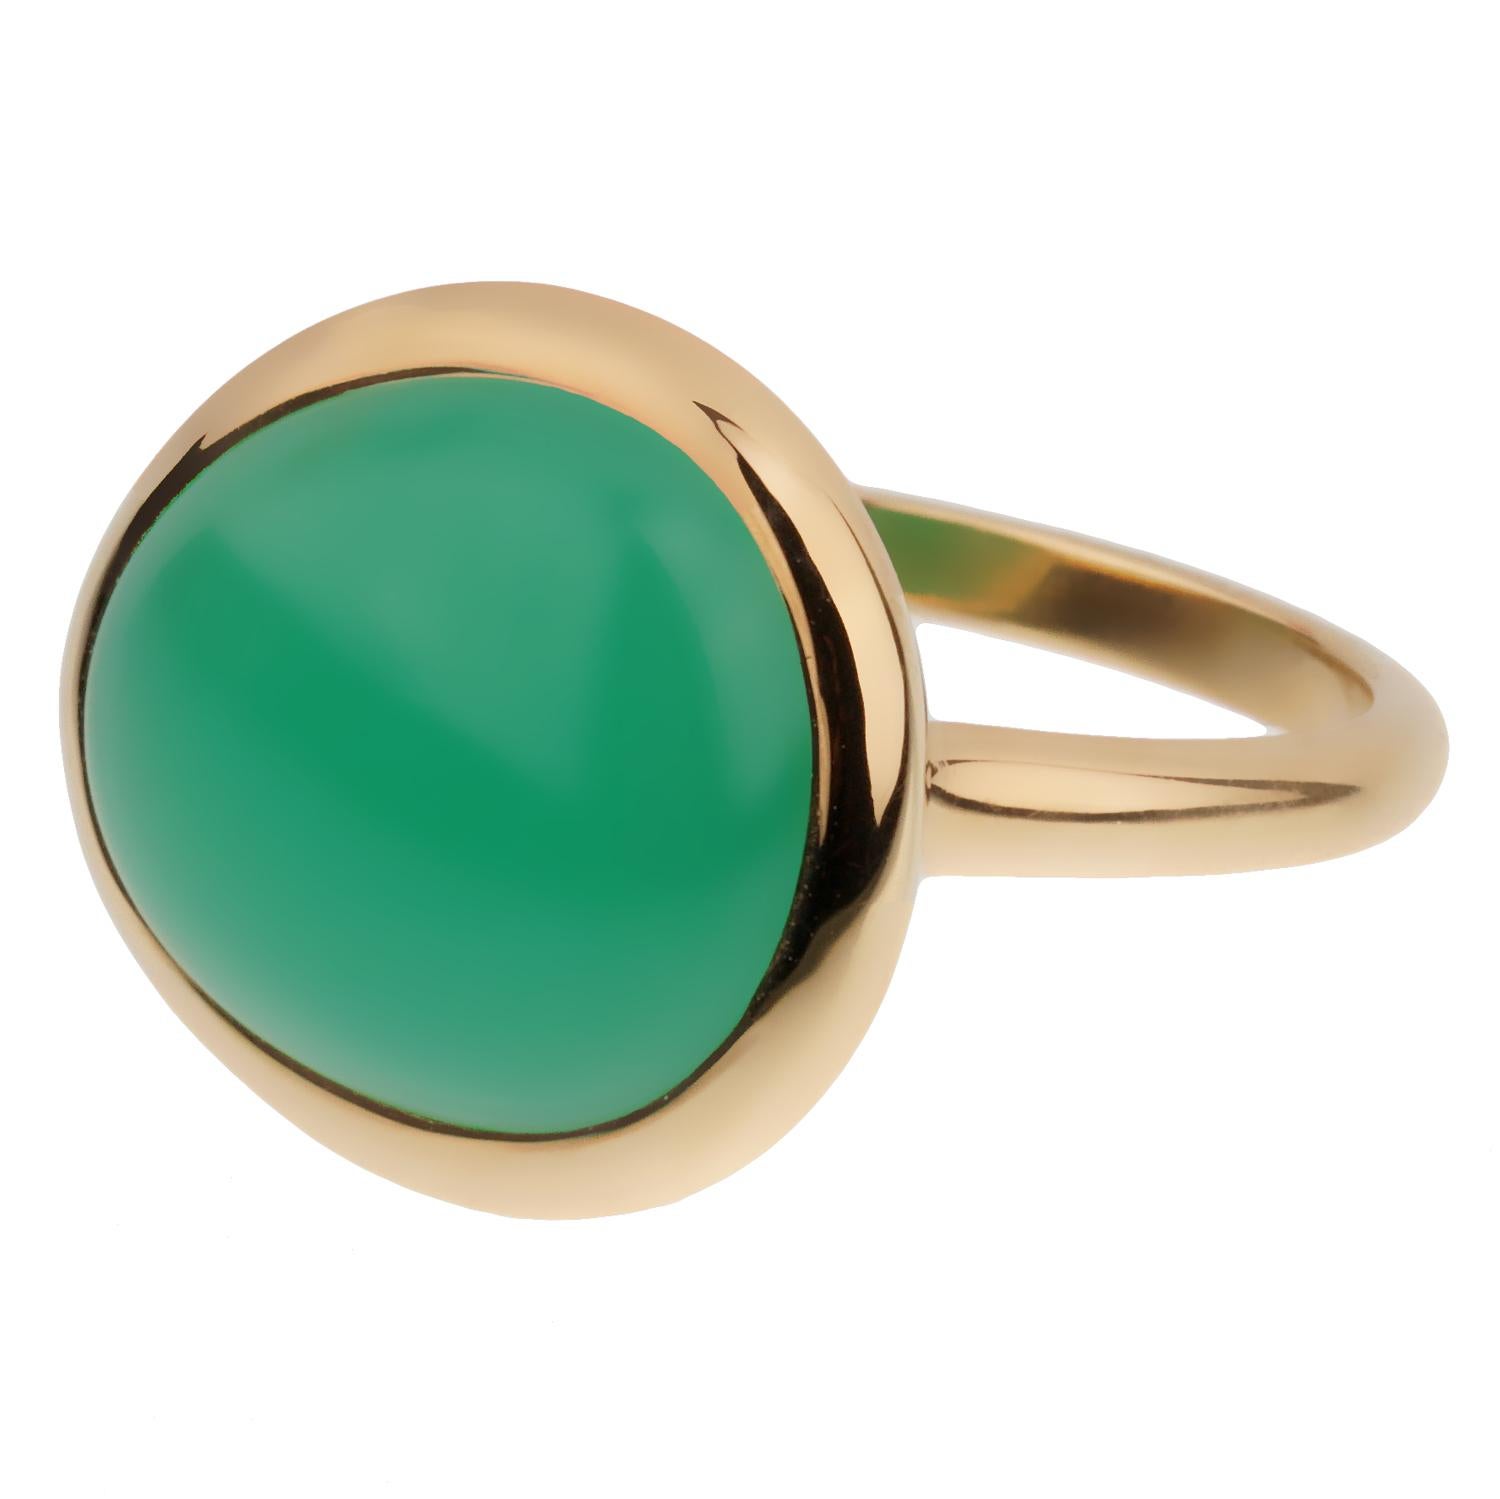 A chic Fred of Paris yellow gold cocktail ring showcasing a 7ct cabochon Chrysophase set in 18k gold. The ring measures a size 5 1/4 and can be resized if needed.